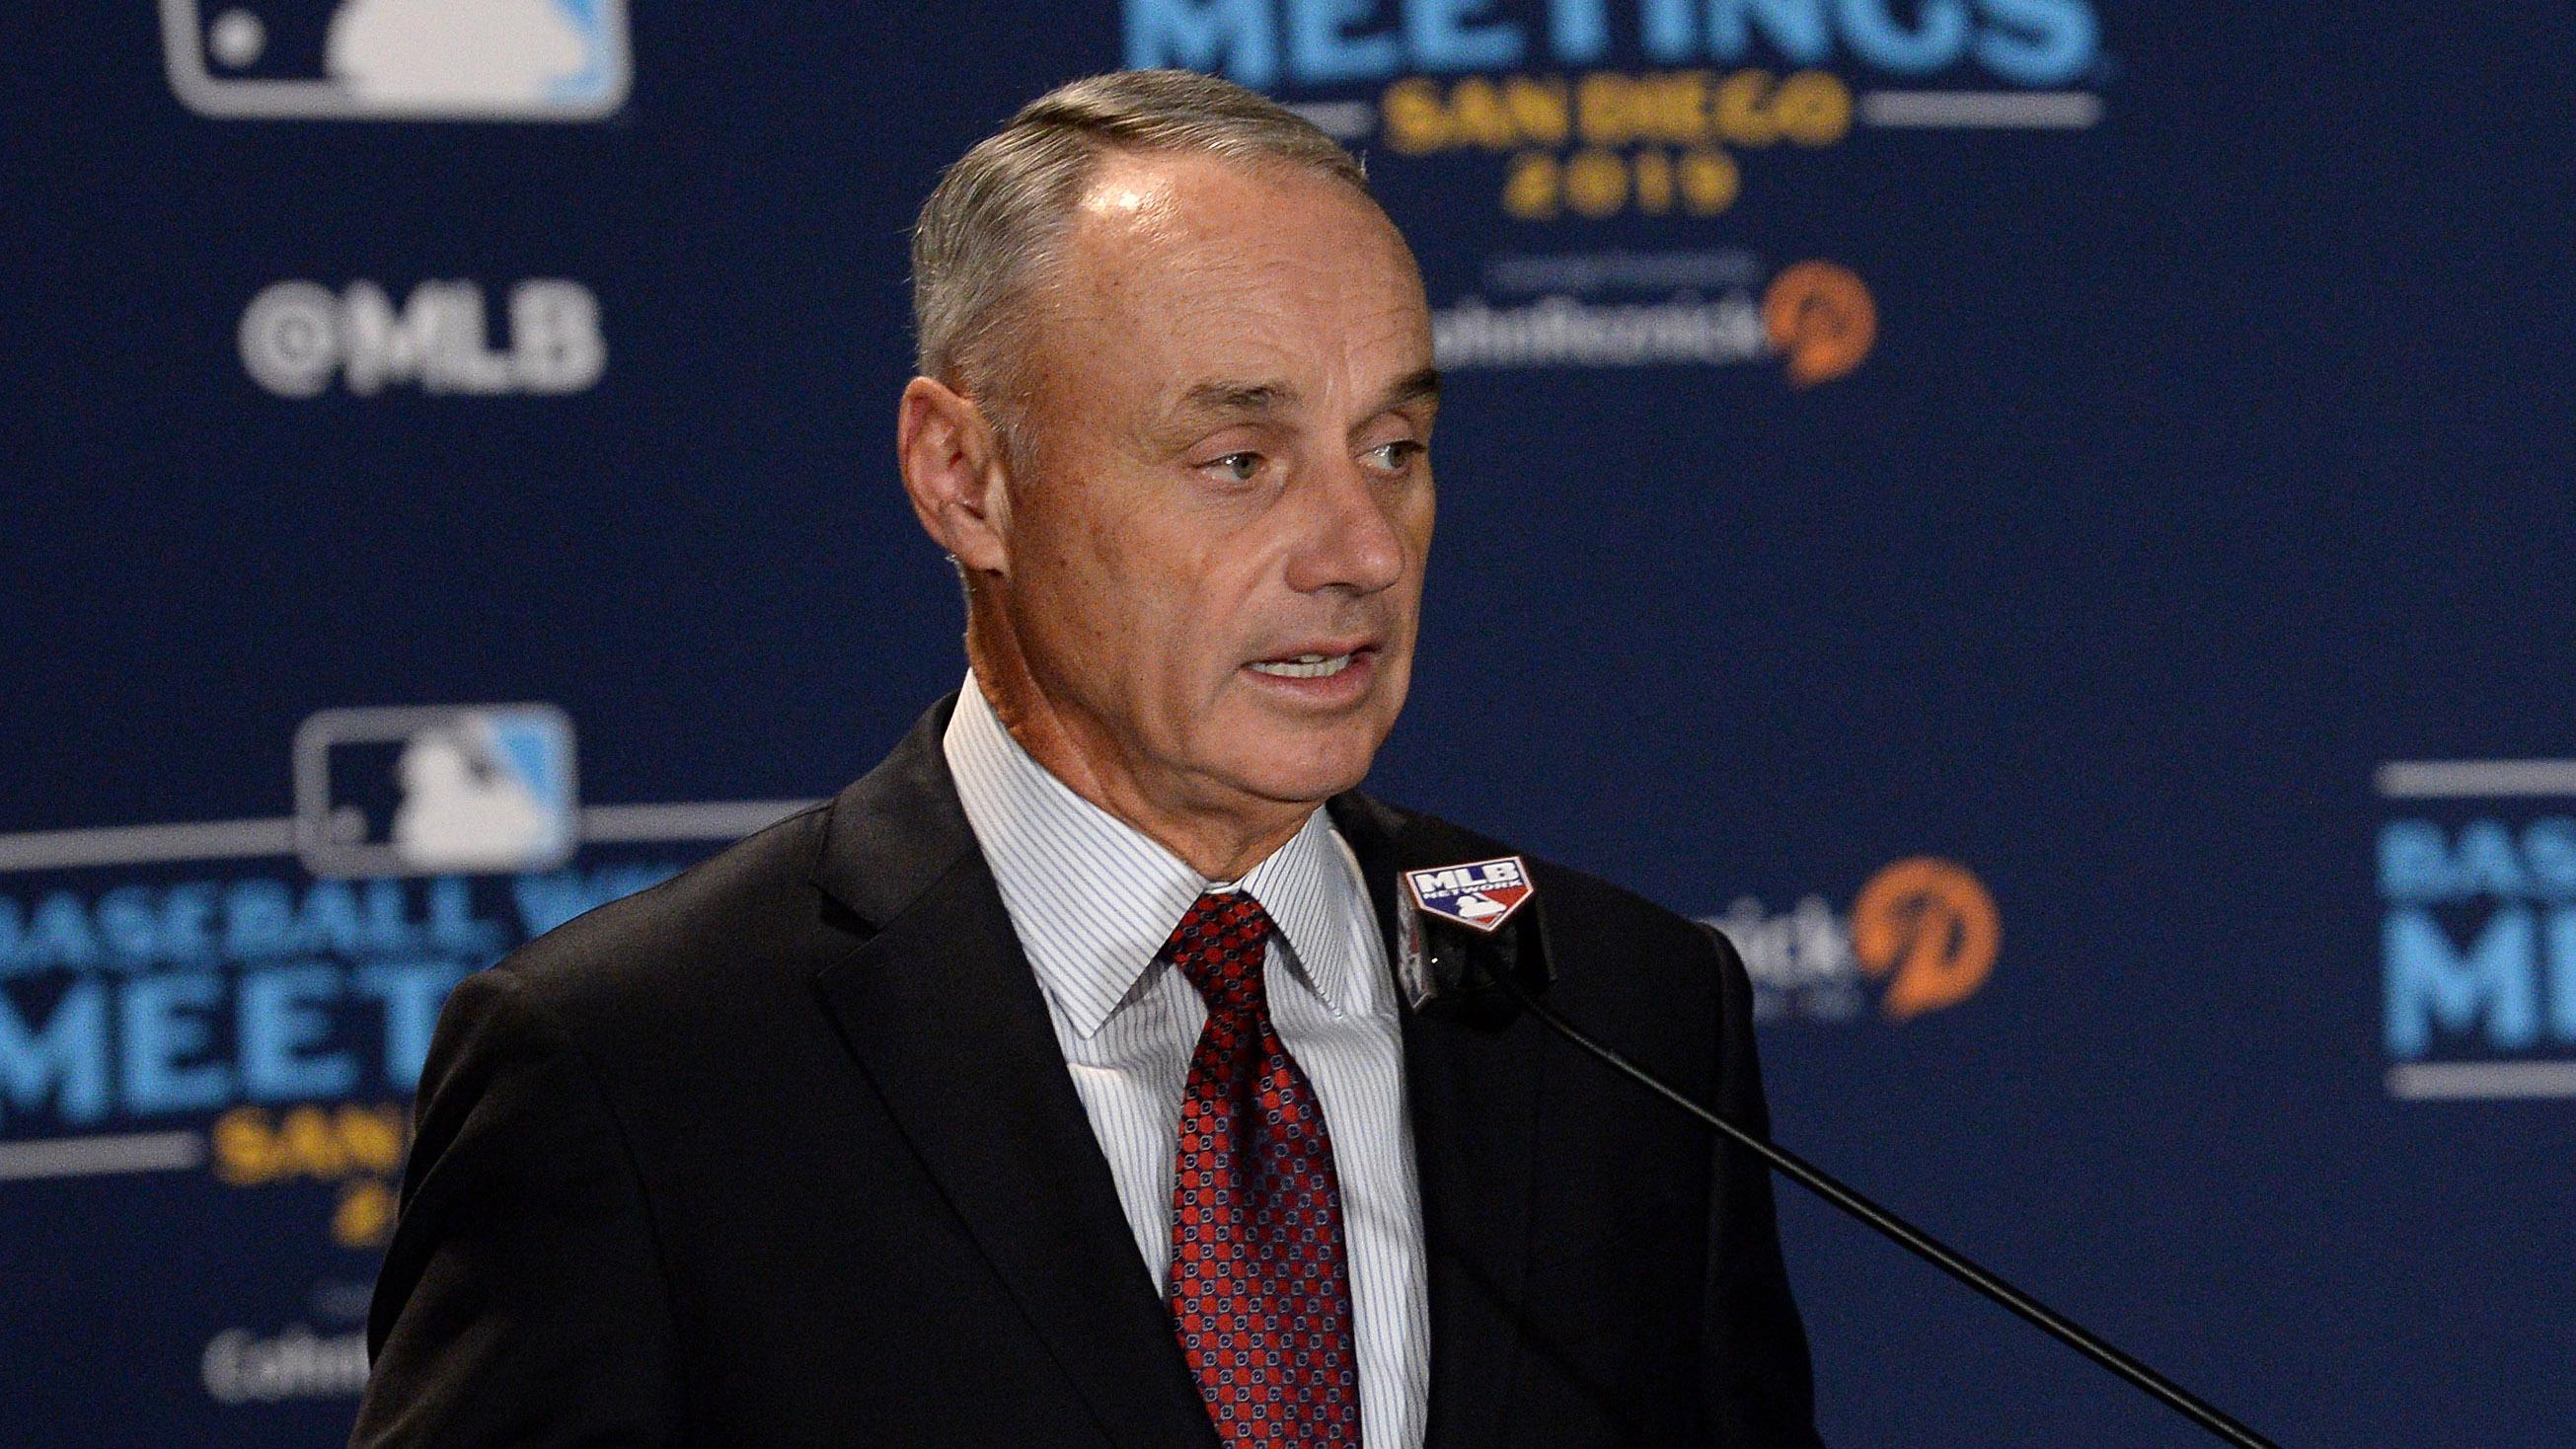 MLB commissioner Rob Manfred speaks to the media before announcing the All-MLB team during the MLB Winter Meetings at Manchester Grand Hyatt. / Orlando Ramirez-USA TODAY Sport